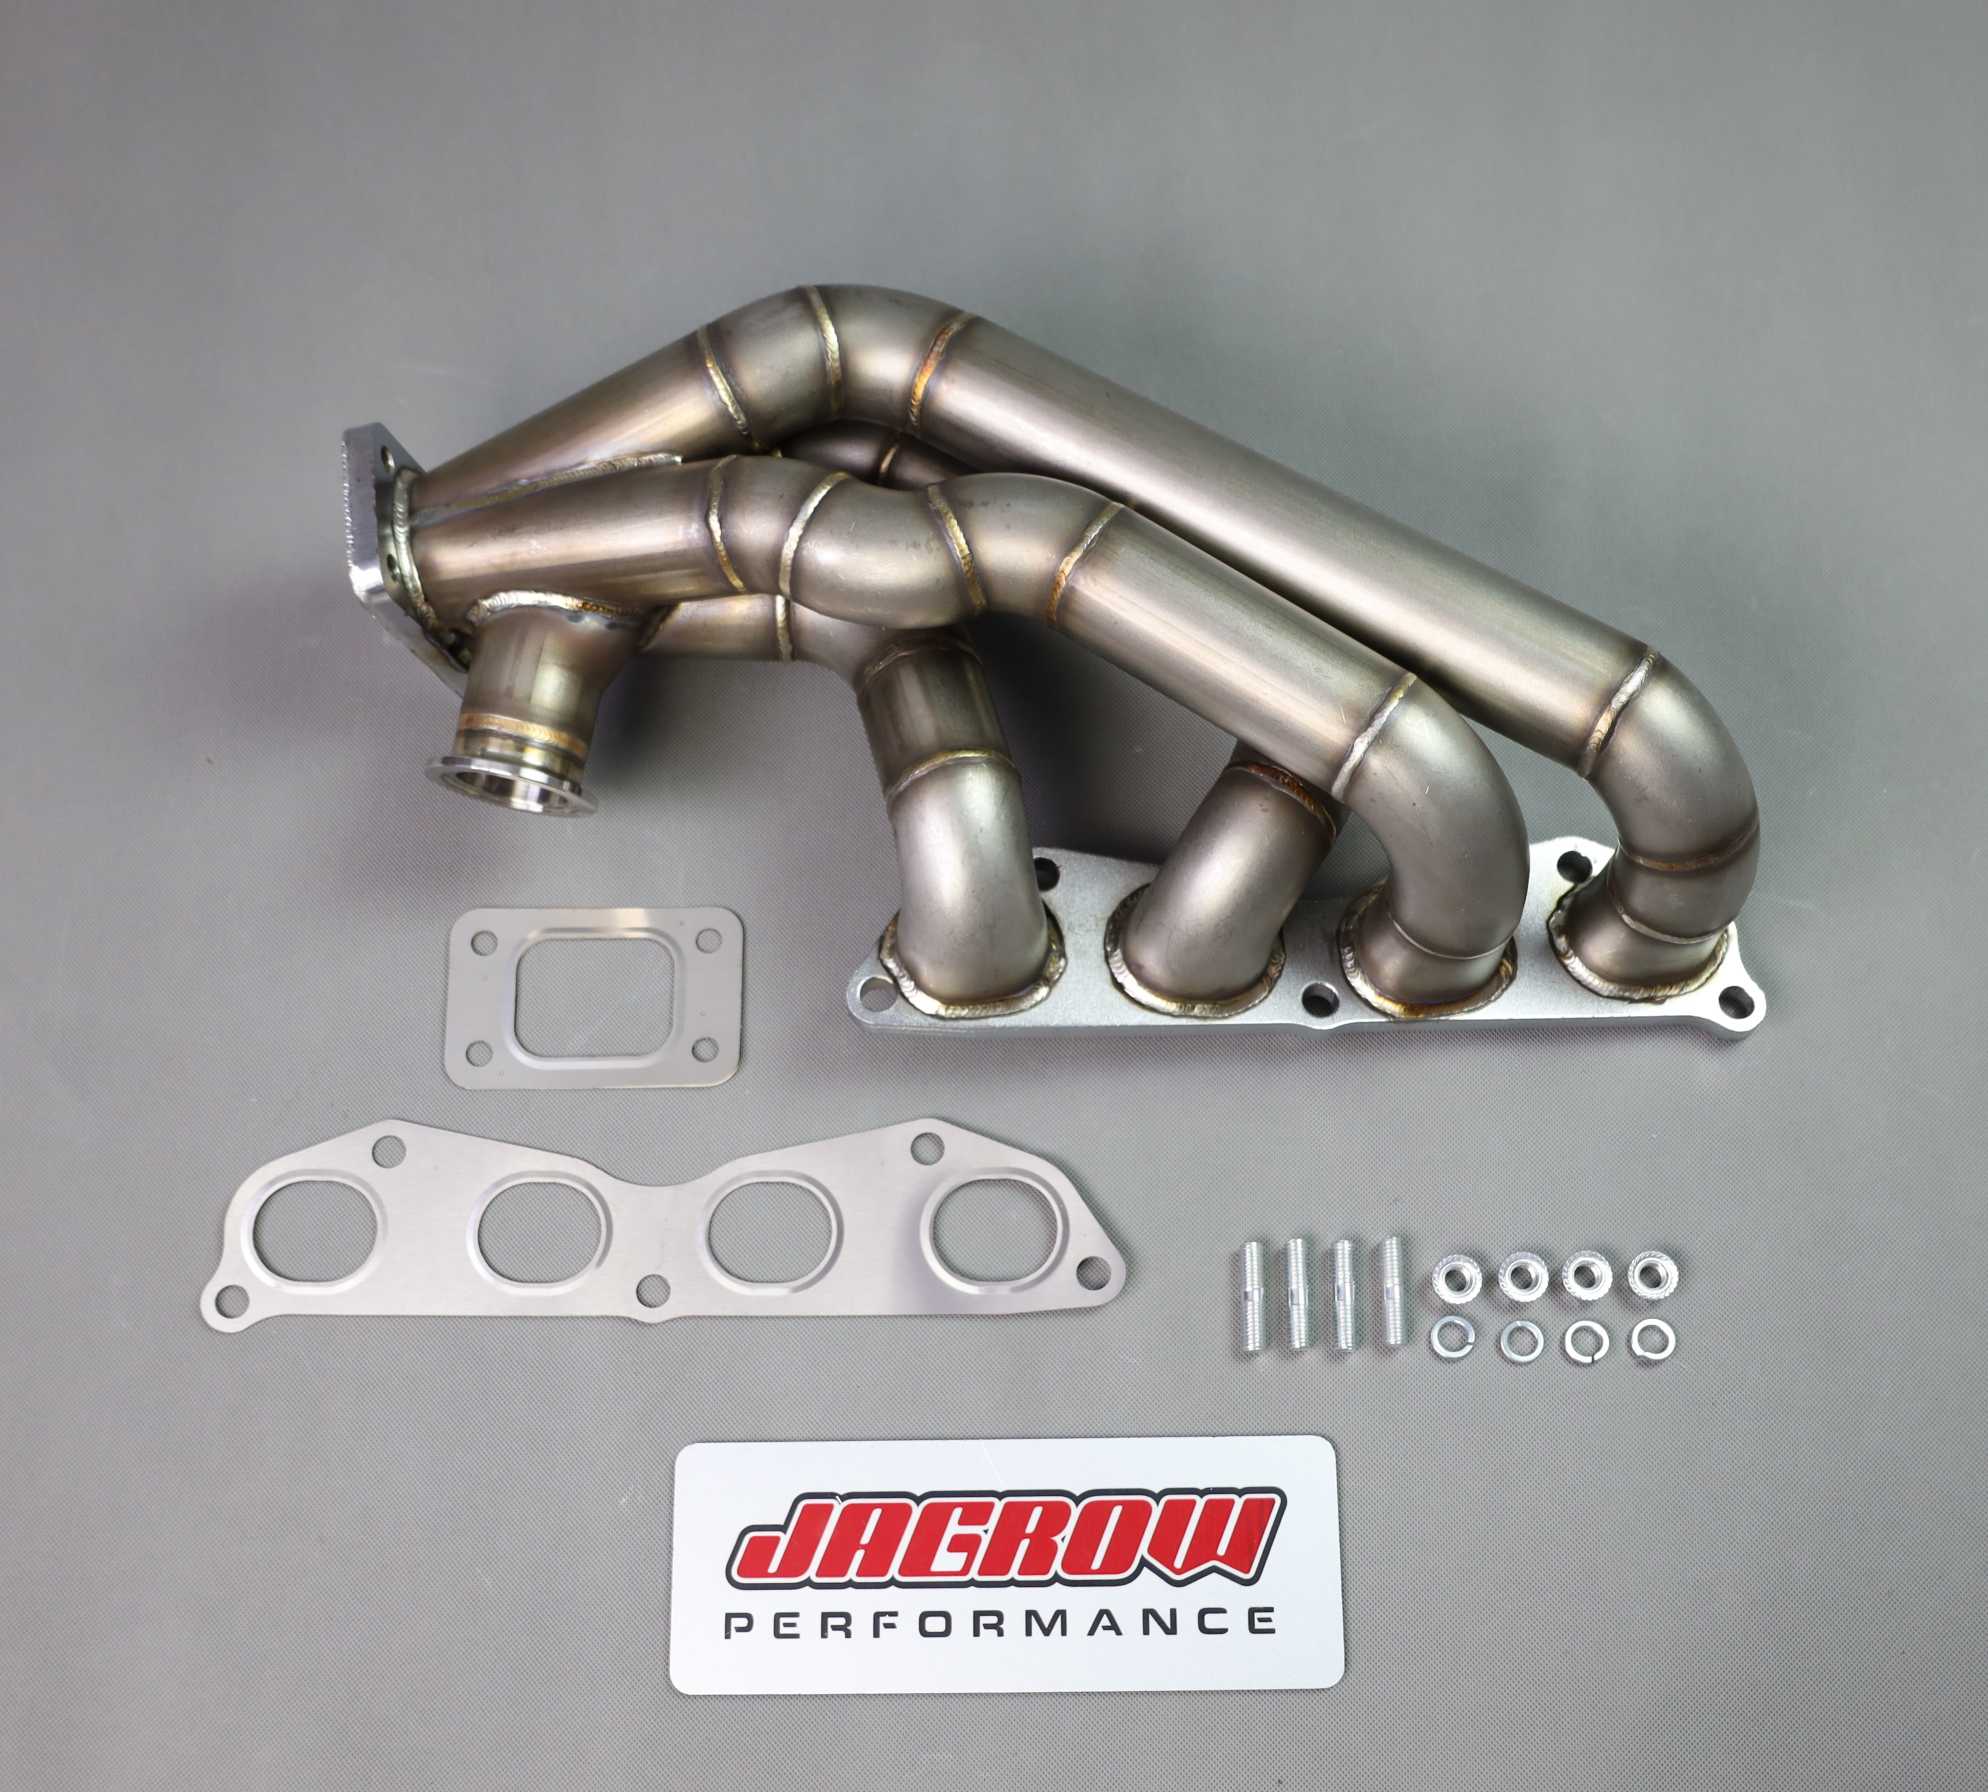 Why modify your car's factory exhaust manifold?